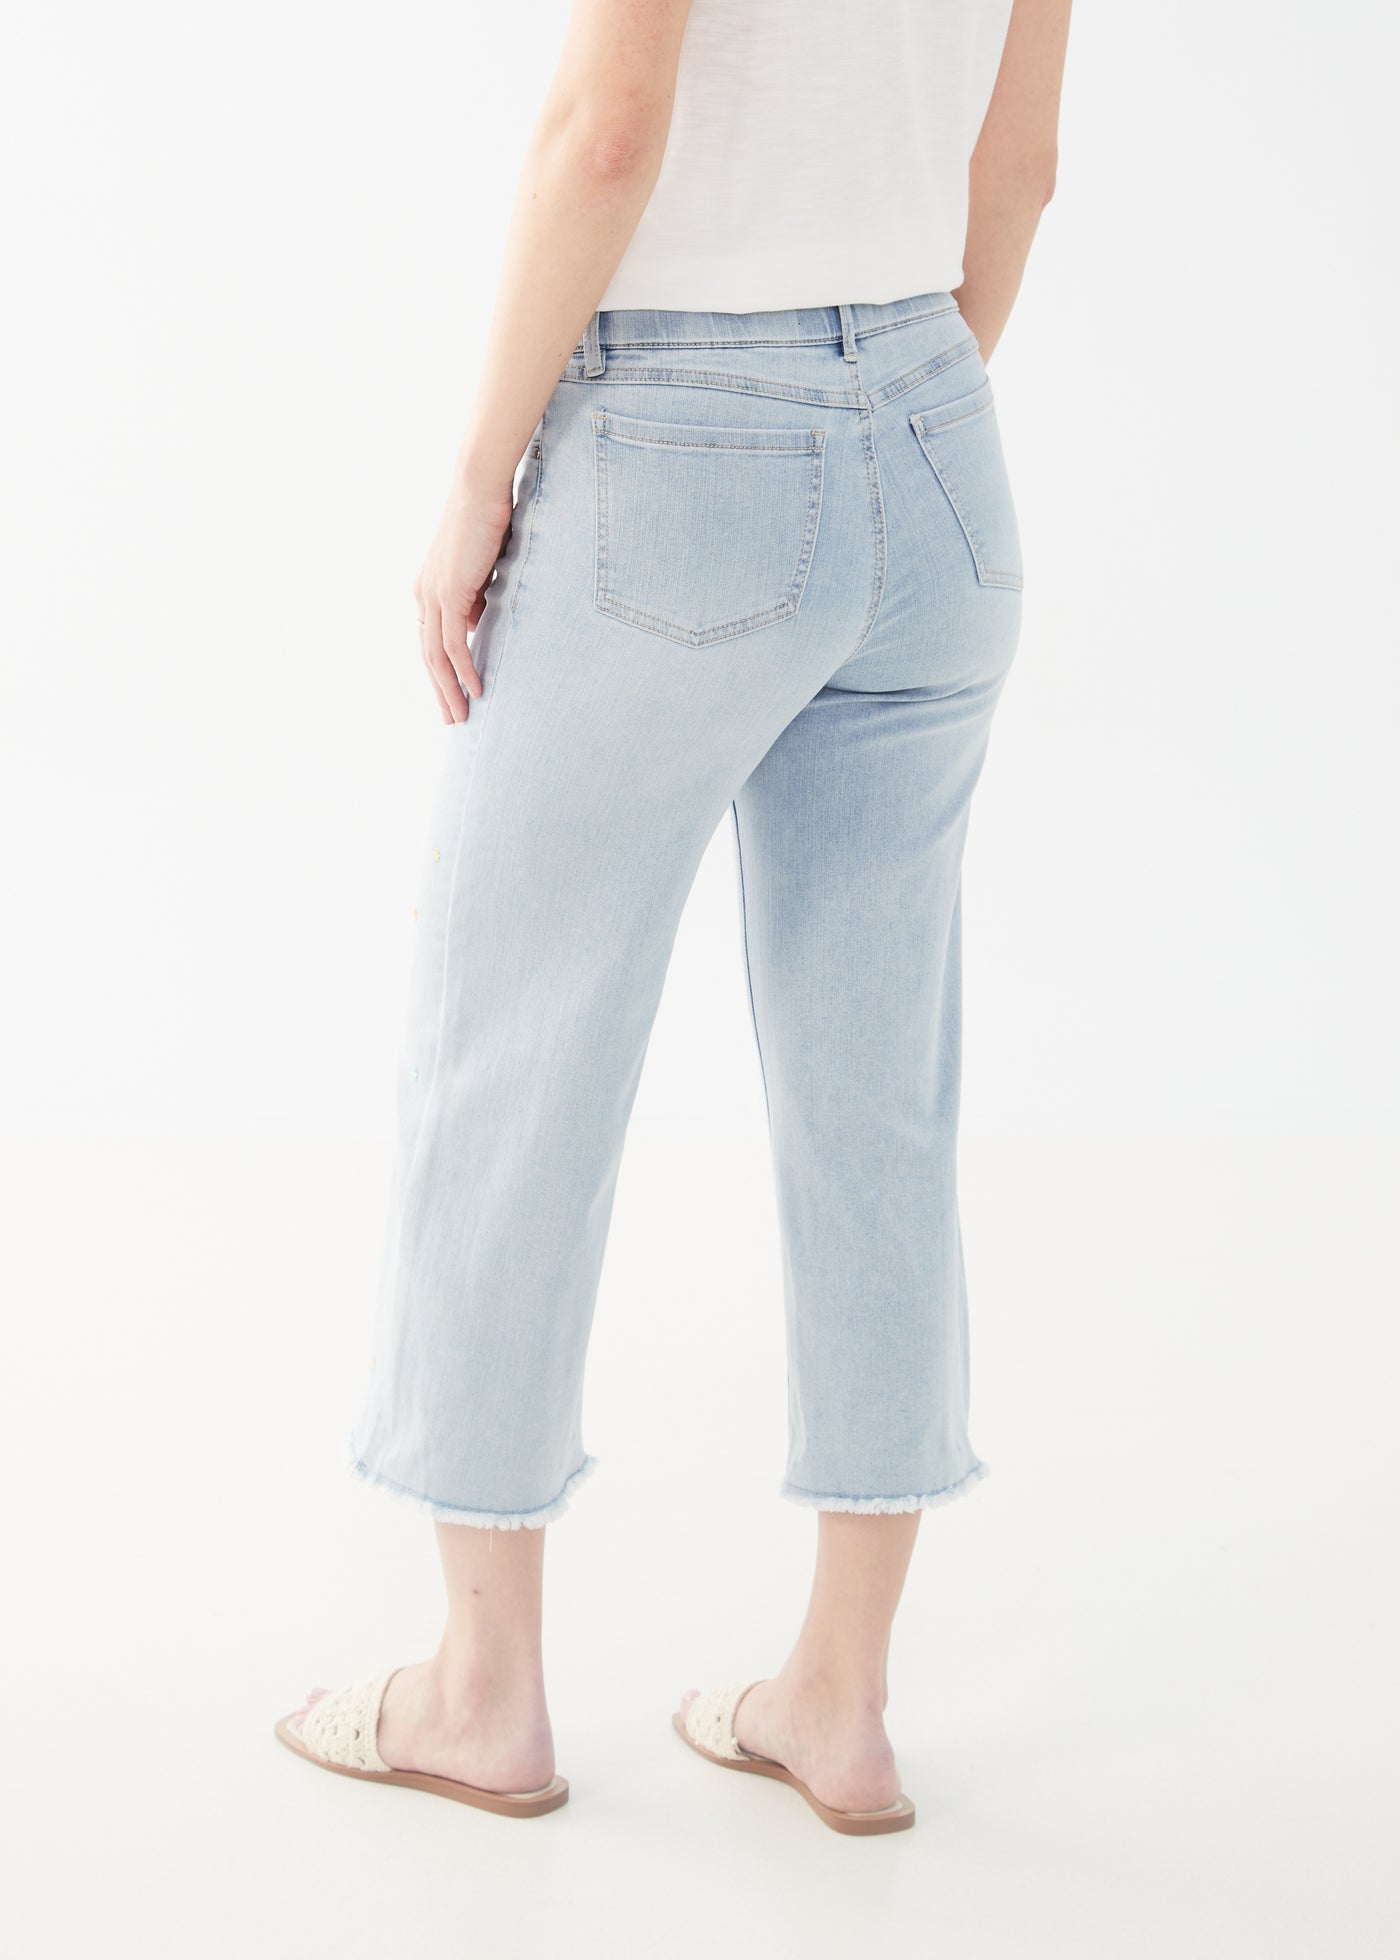 French Dressing Jeans Pull-On Wide Crop Pants 